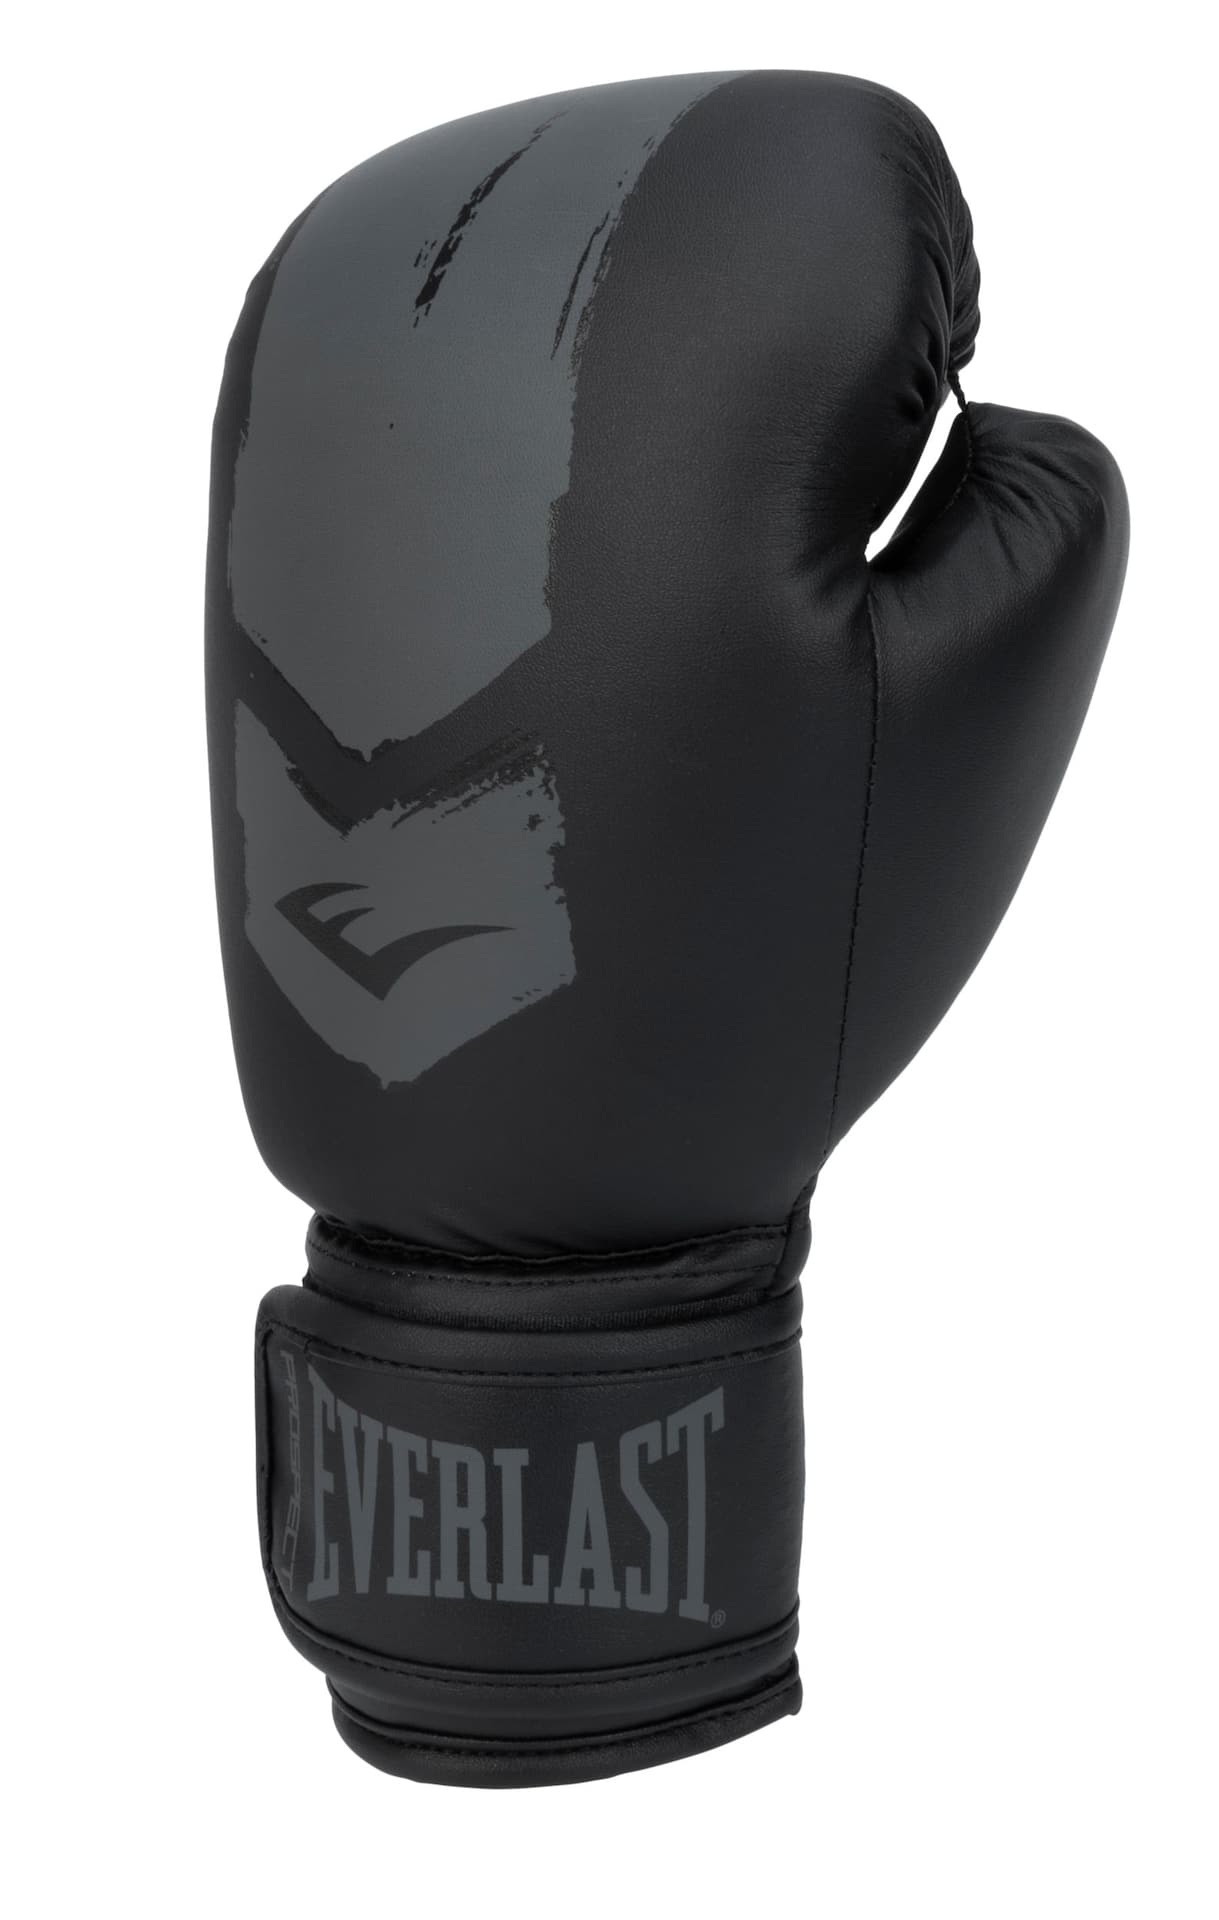 https://media-www.canadiantire.ca/product/playing/exercise/exercise-accessories/1841252/everlast-youth-gloves-8oz-black-c86a00a1-f752-46d5-b8b1-d7d856725ca7-jpgrendition.jpg